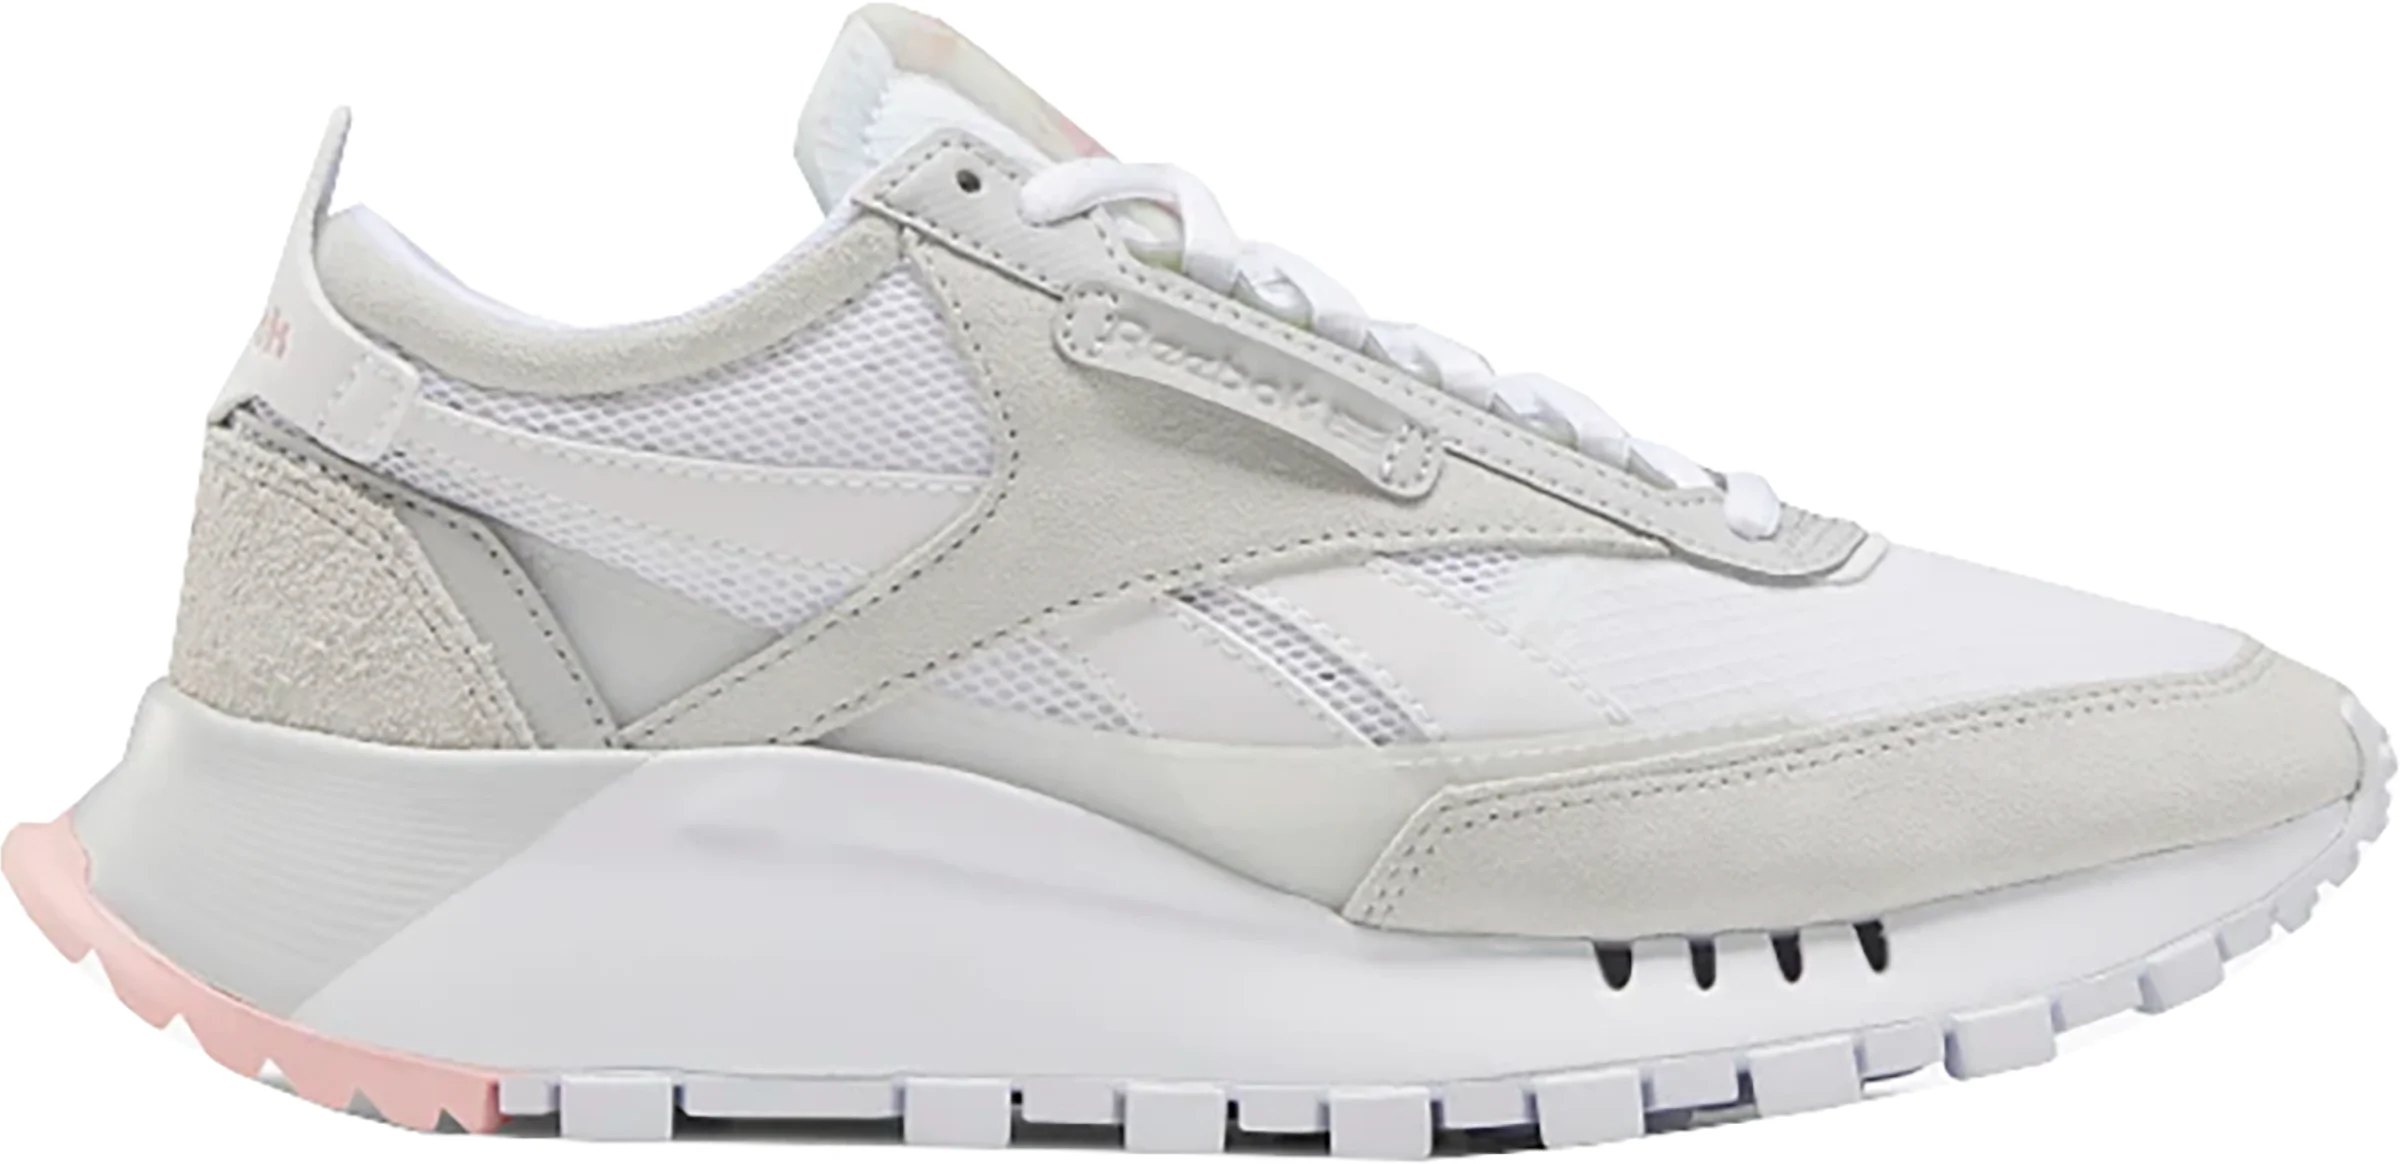 Classic Leather Shoes - Ftwr White / Pure Grey 3 / Pure Grey 7 | Reebok